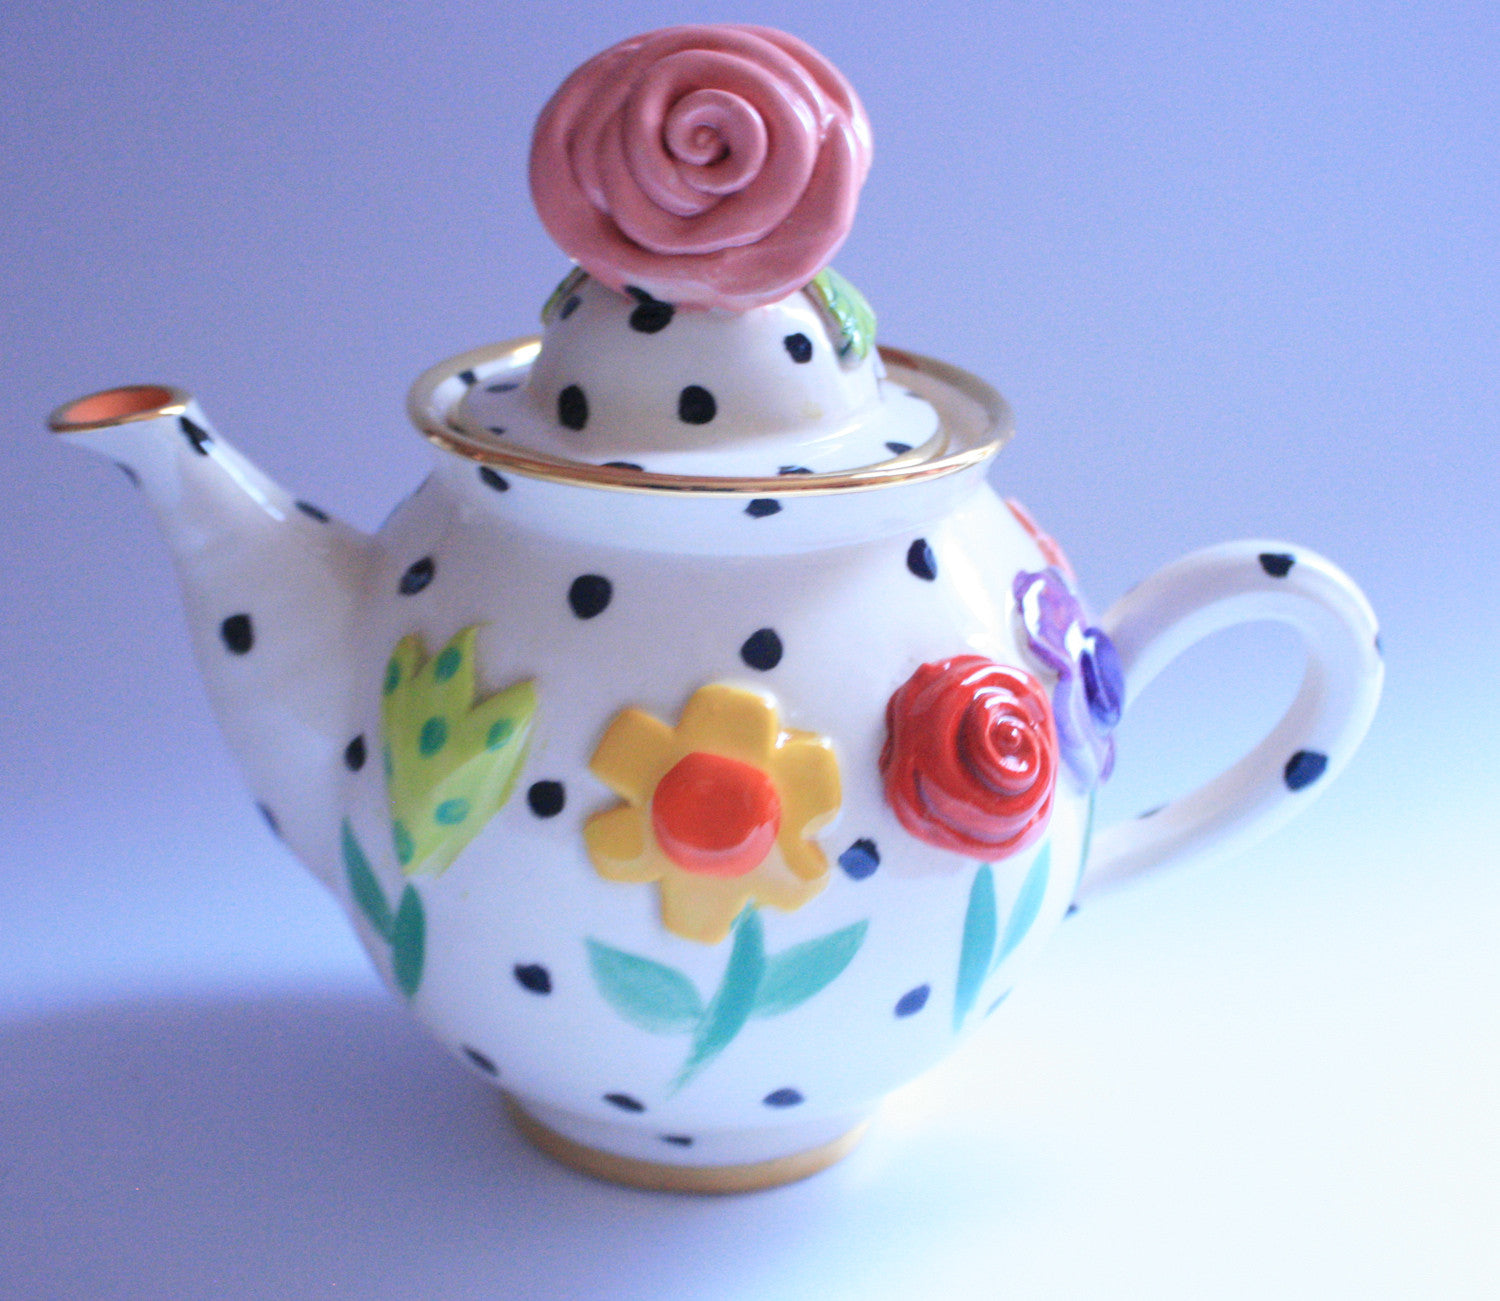 Tiny Teapot Pressed Flowers - MaryRoseYoung